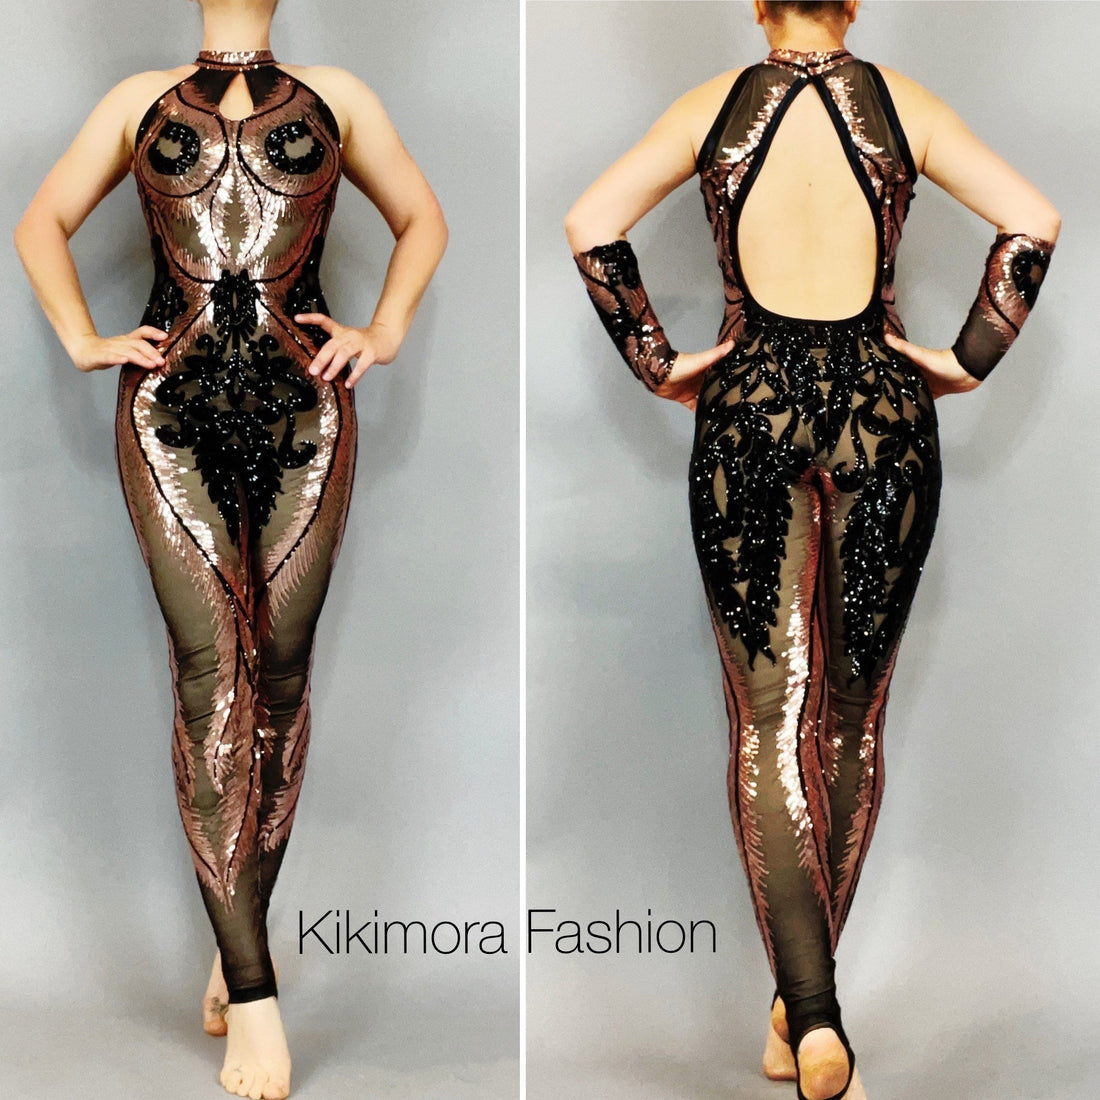 Showgirl Costume, Sexy Open Back, Sequins Mesh Catsuit, Unitard for Contortionist, Sheer Jumpsuit, Dance Party Outfit